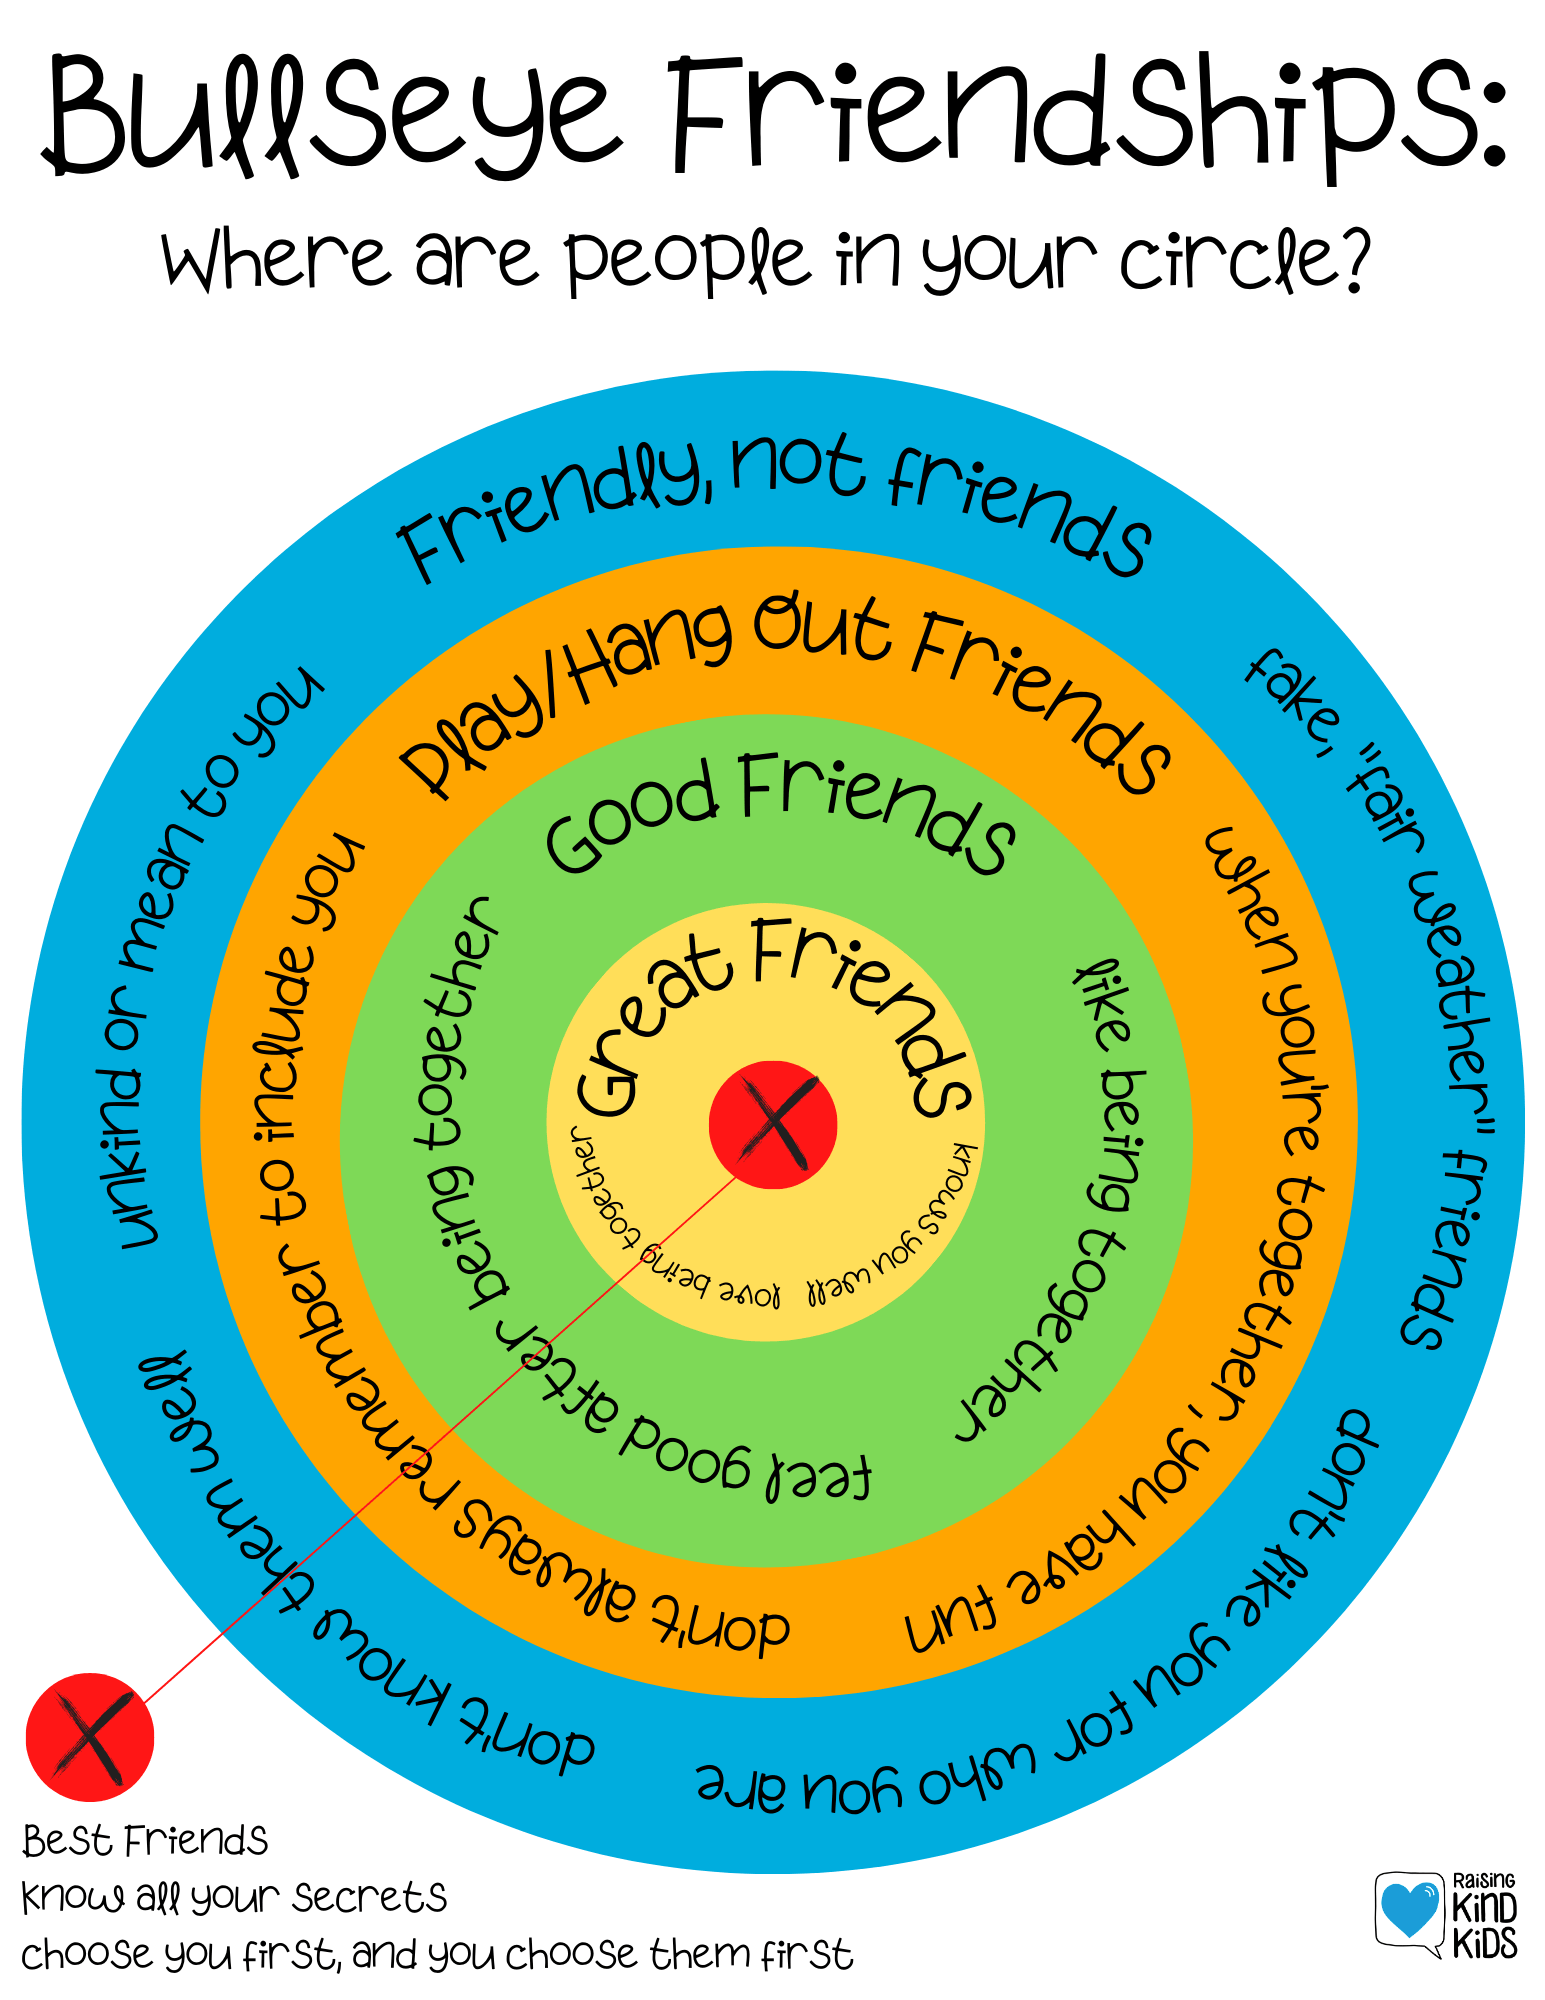 Use this Bullseye Friendship printable to help explain different kinds of friends and different kinds of friendships to kids so they set clear, healthy boundaries. 